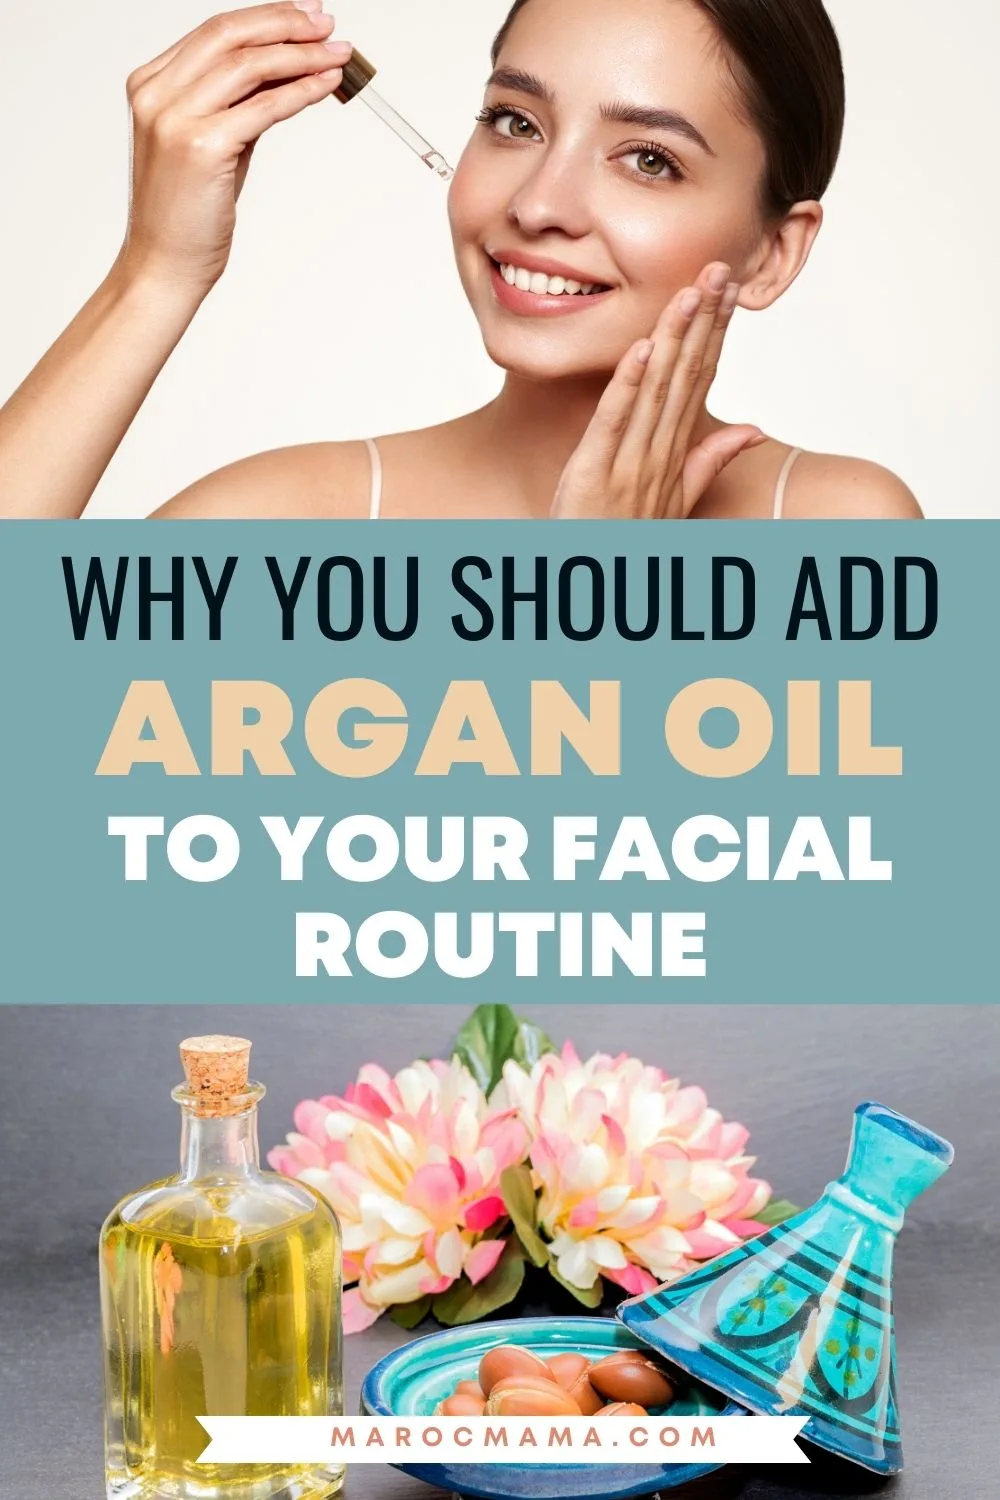 Top image, a woman applying Moroccan argan oil to her face and bottom image is argan oil in a jar